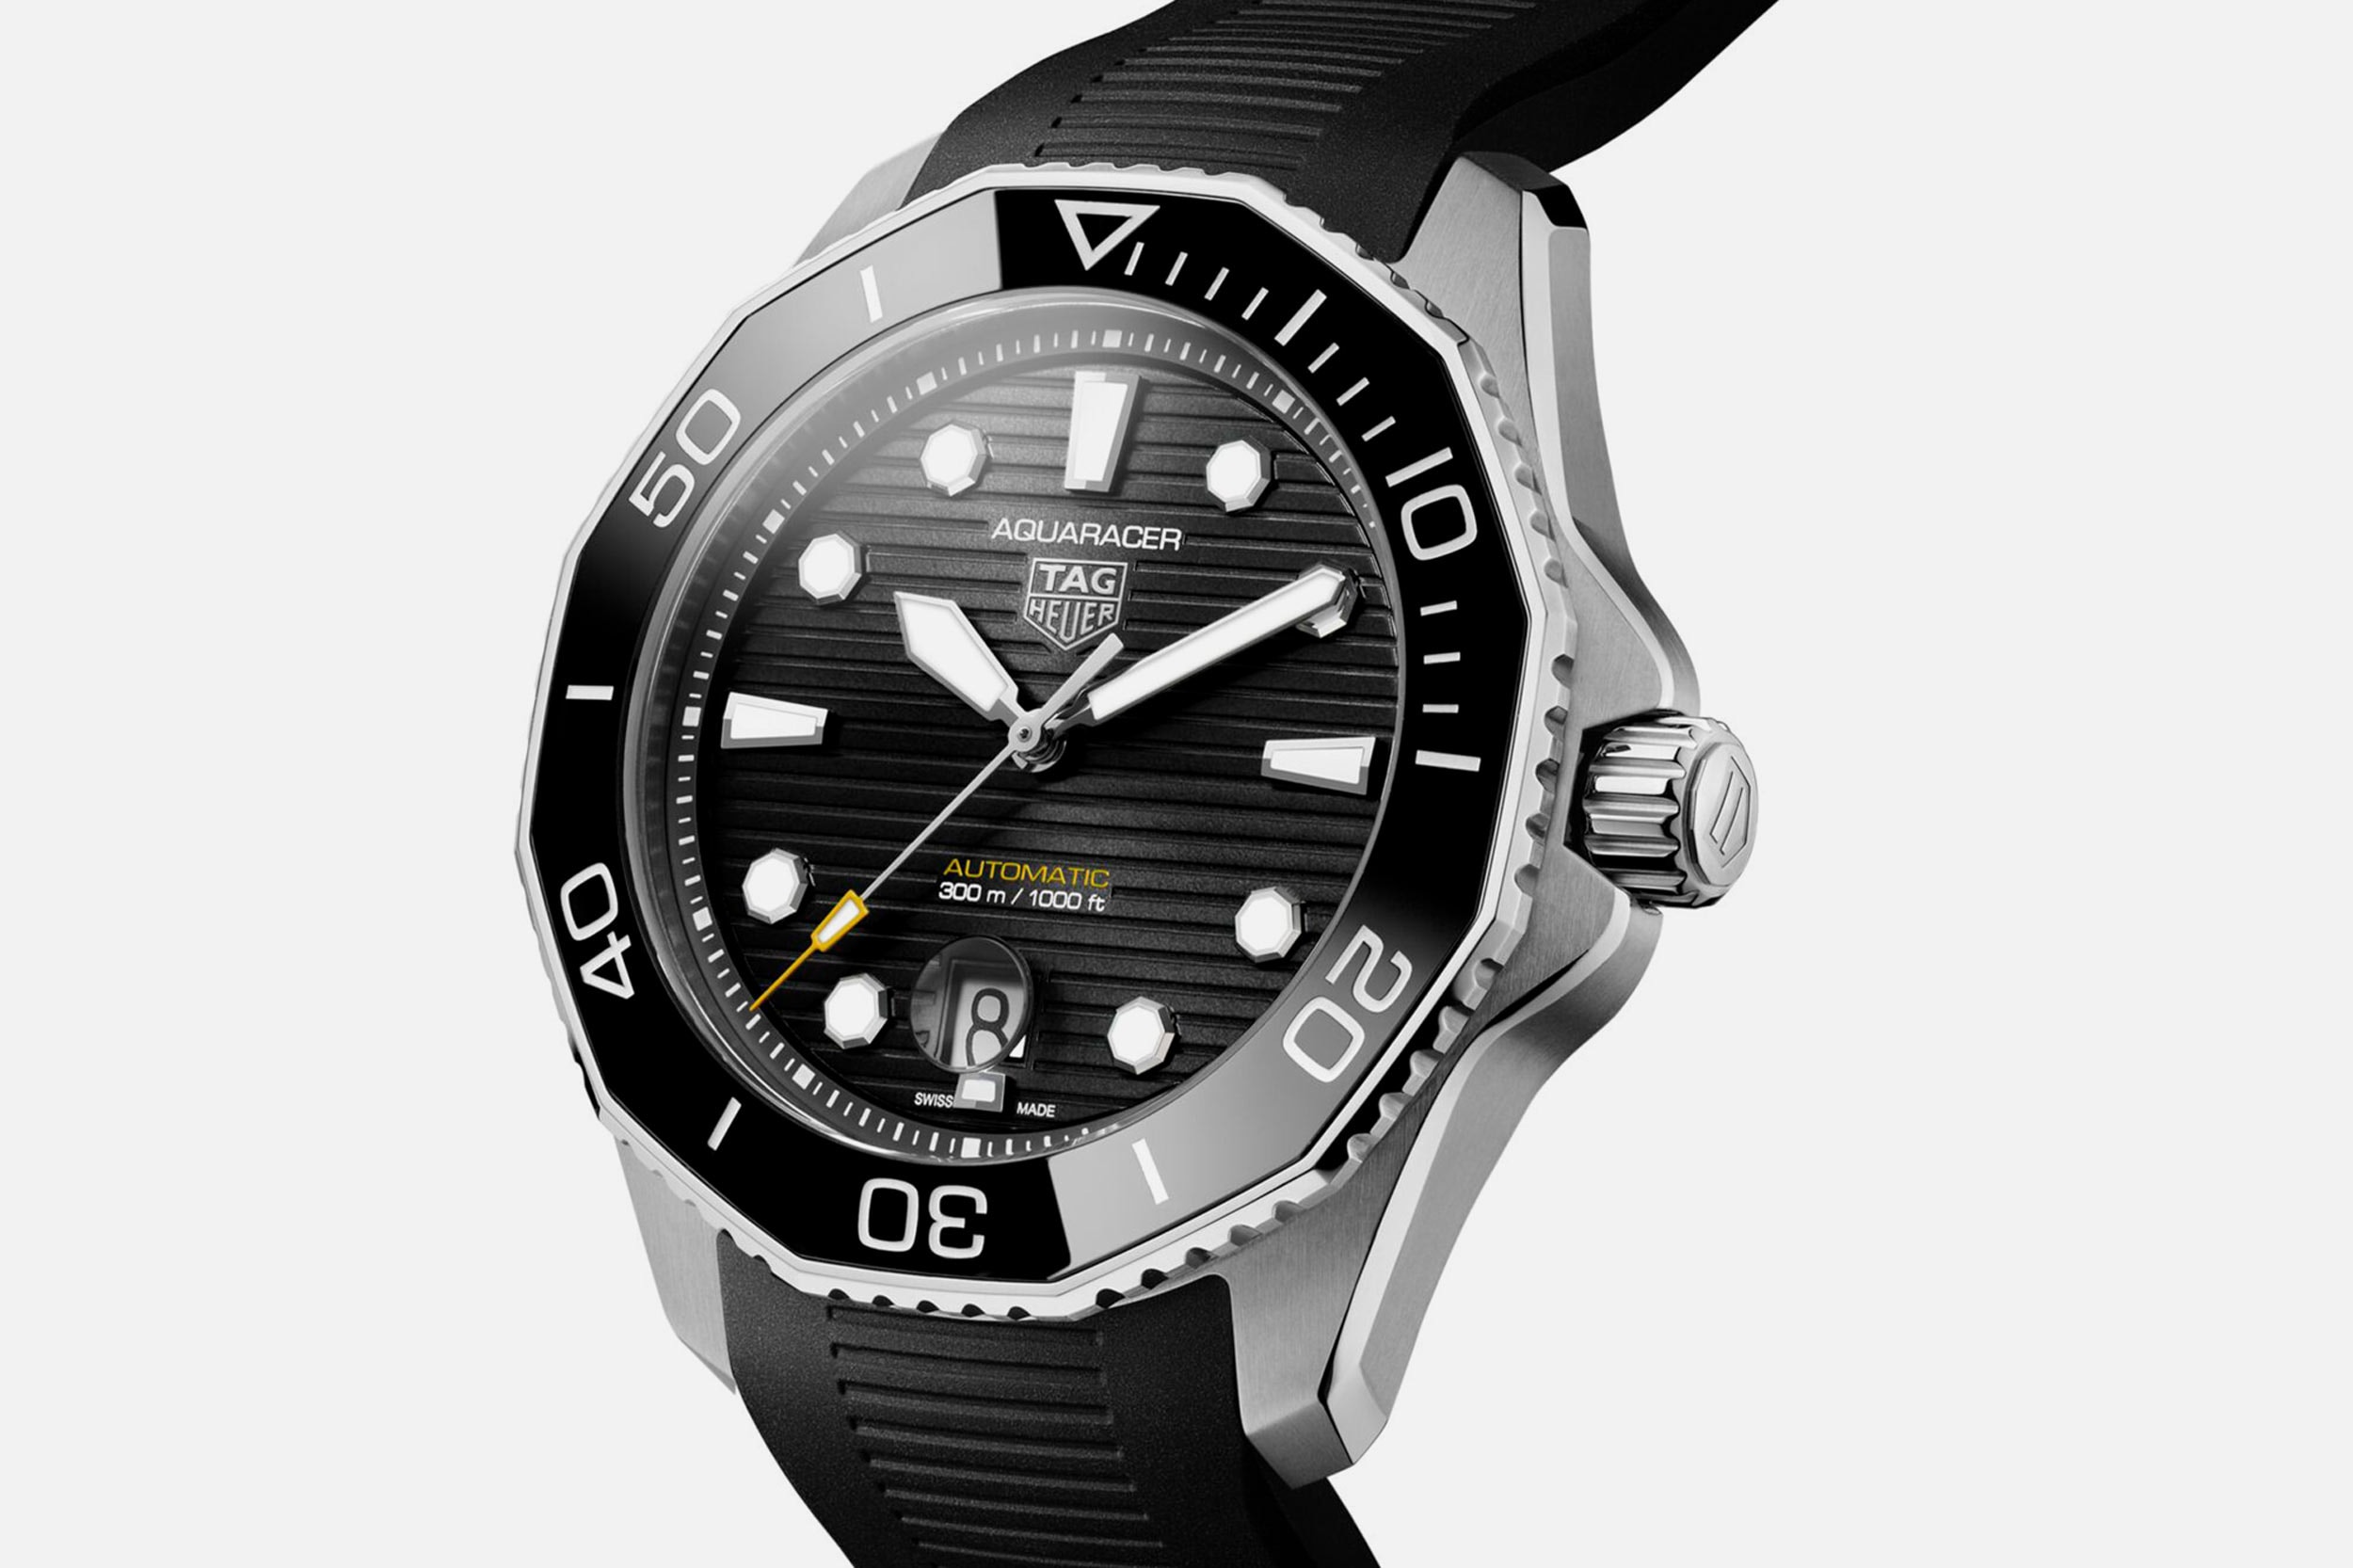 TAG Heuer Announces the Return of the Nightdiver, Along With Some New Rubber Straps for the Aquaracer